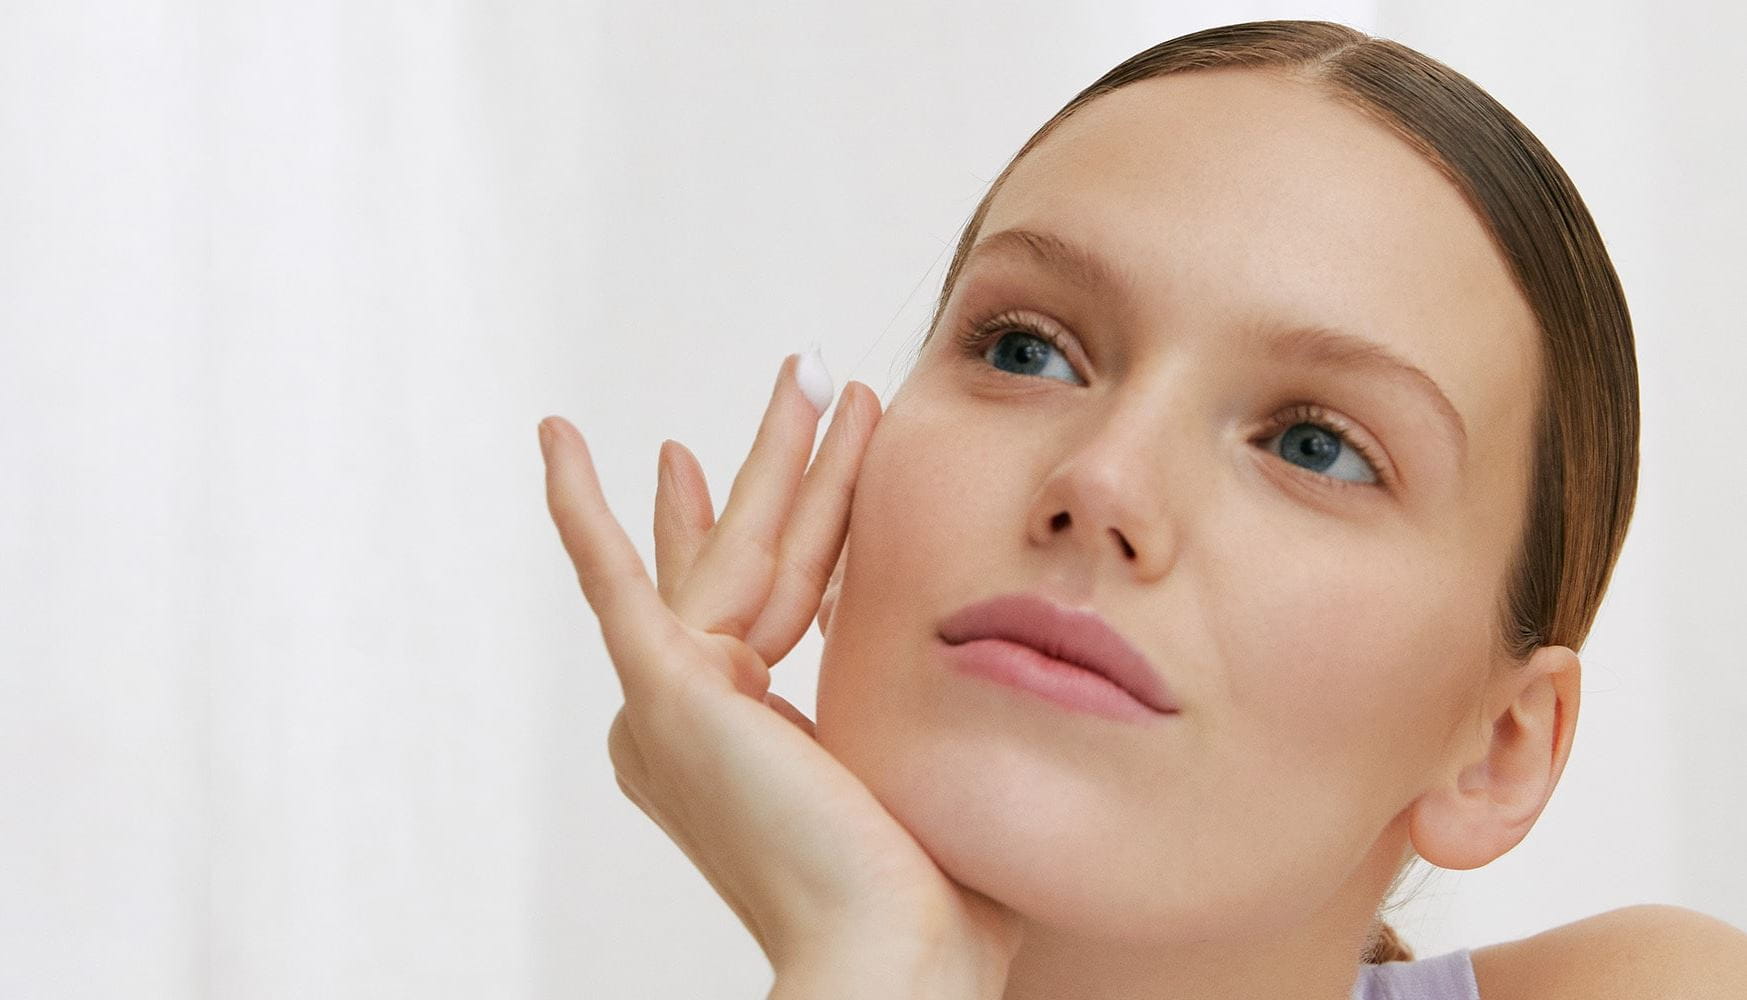 View of model with right hand pressed on the face and product smeared on ring finger against a white background.